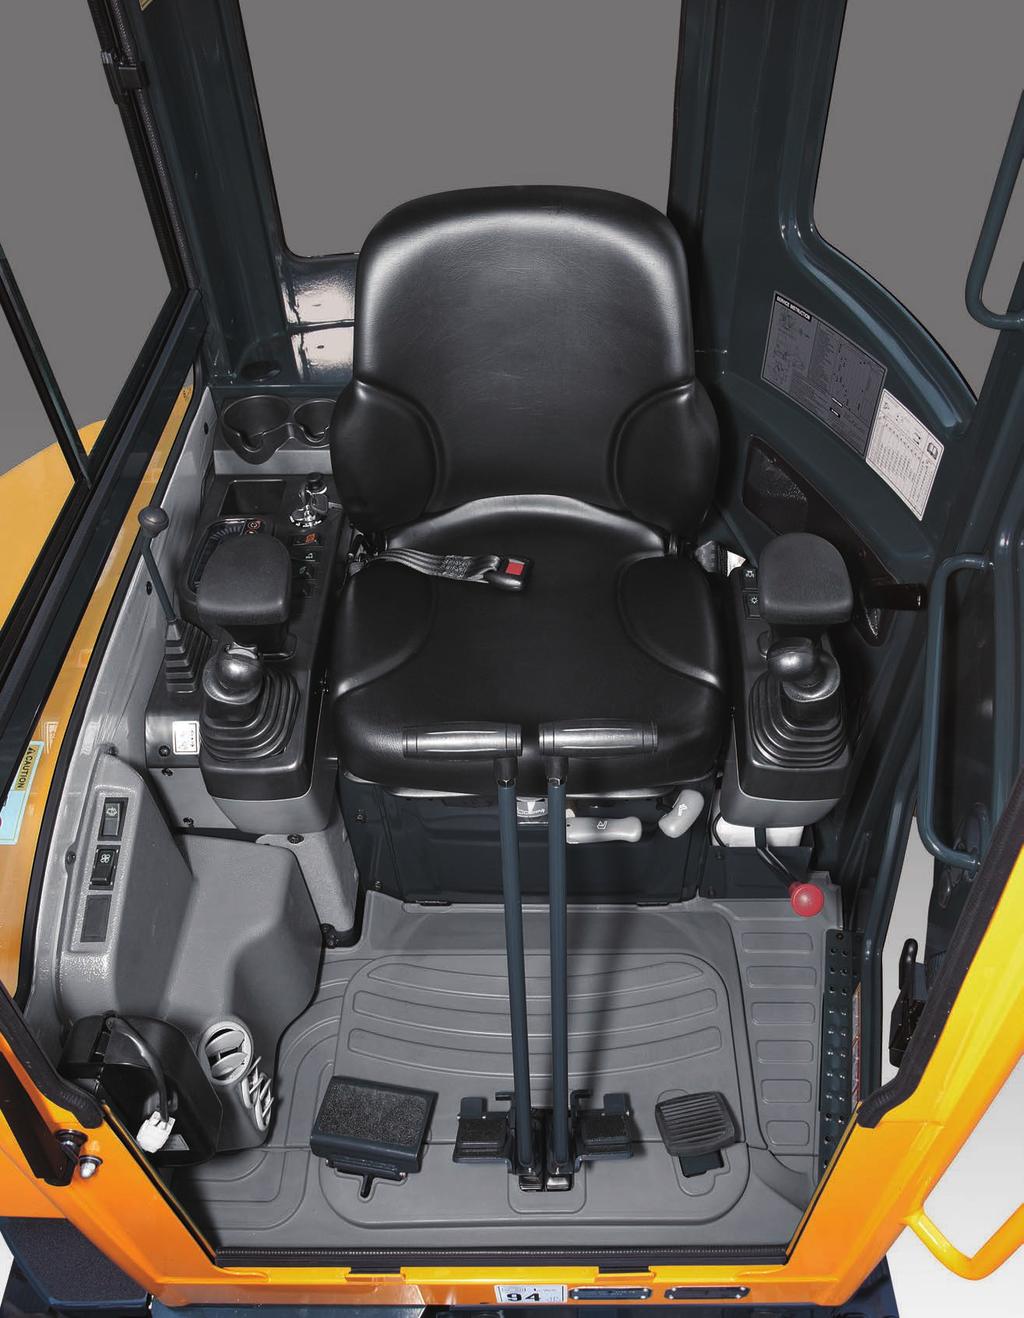 4 2 3 5 1 1 6 7 Operating a 9A Compact Excavator Series is comfortable, safe and simple, with a customizable work environment and operator-selectable preferences. 08 1.